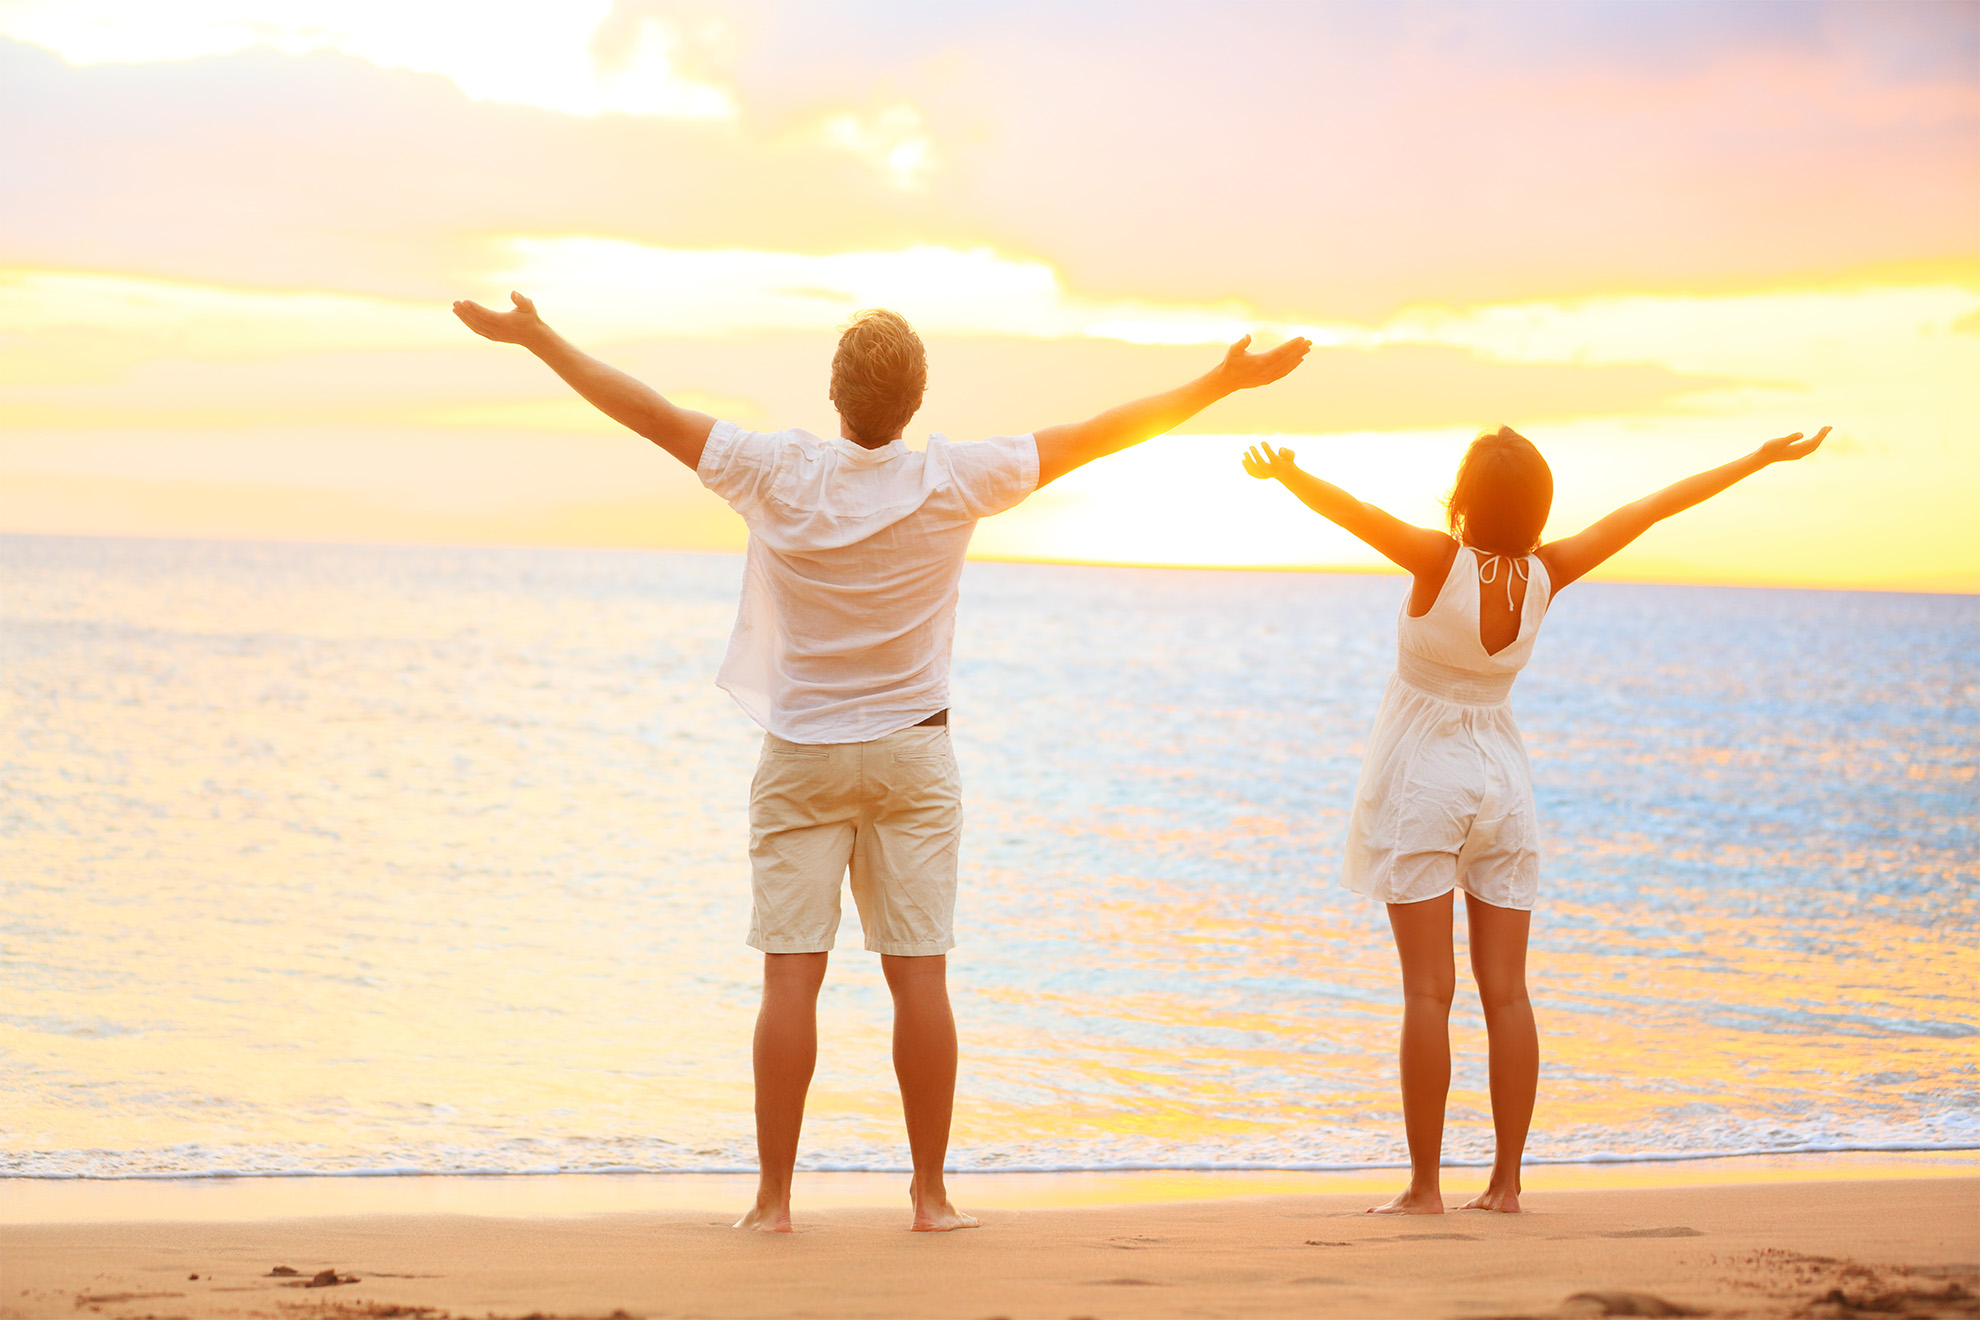 Happy cheering couple enjoying sunset at beach with arms raised up in joyful elated happiness. Happiness concept with young joyous couple, Caucasian man and Asian woman.